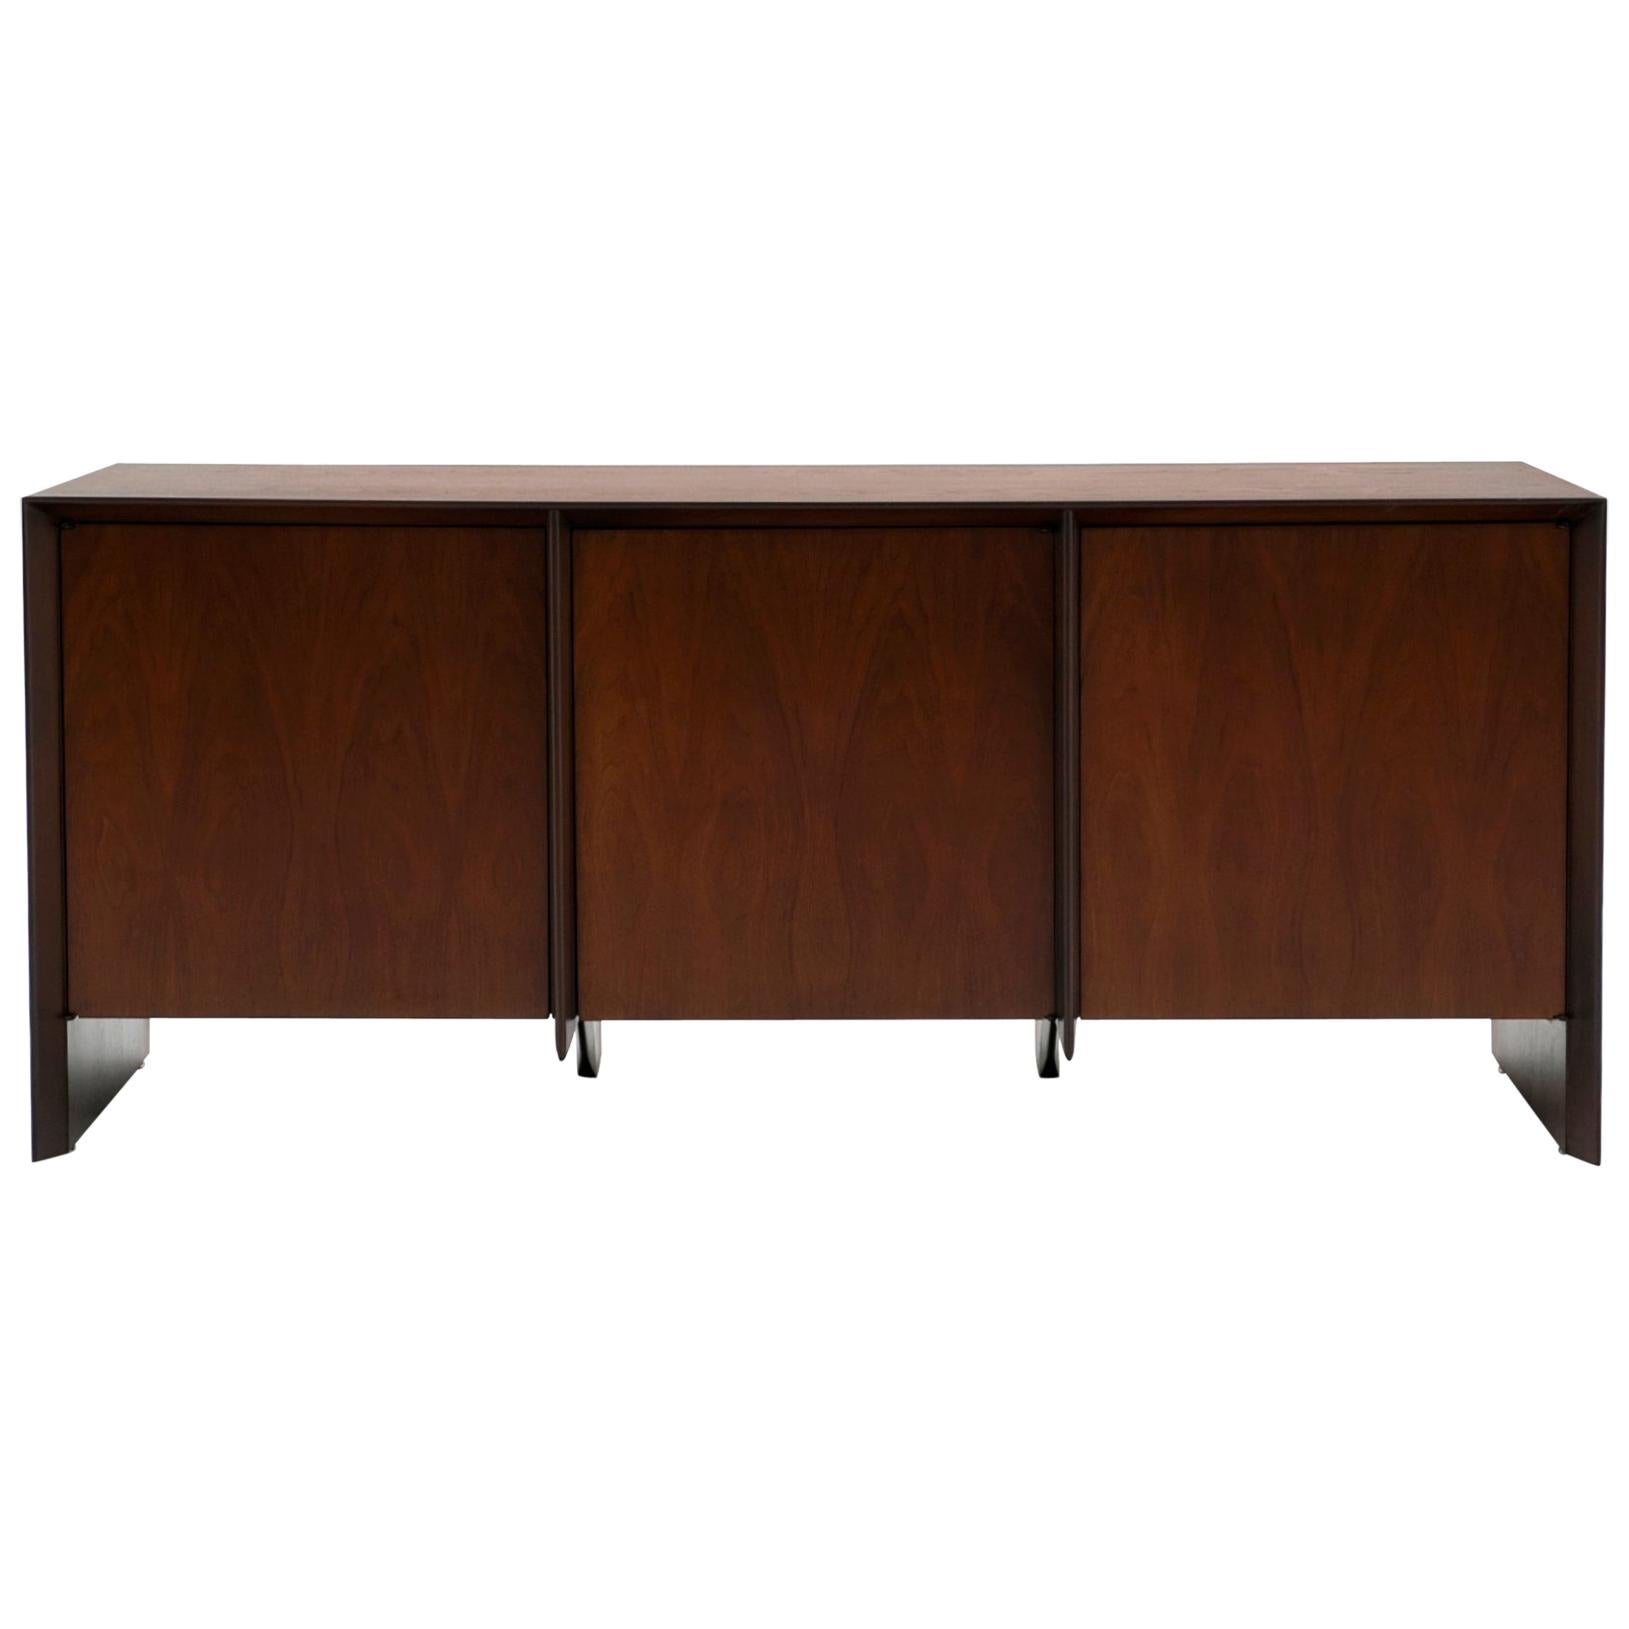 Cabinet / Credenza / Sideboard by Robsjohn Gibbings for Widdicomb, Excellent